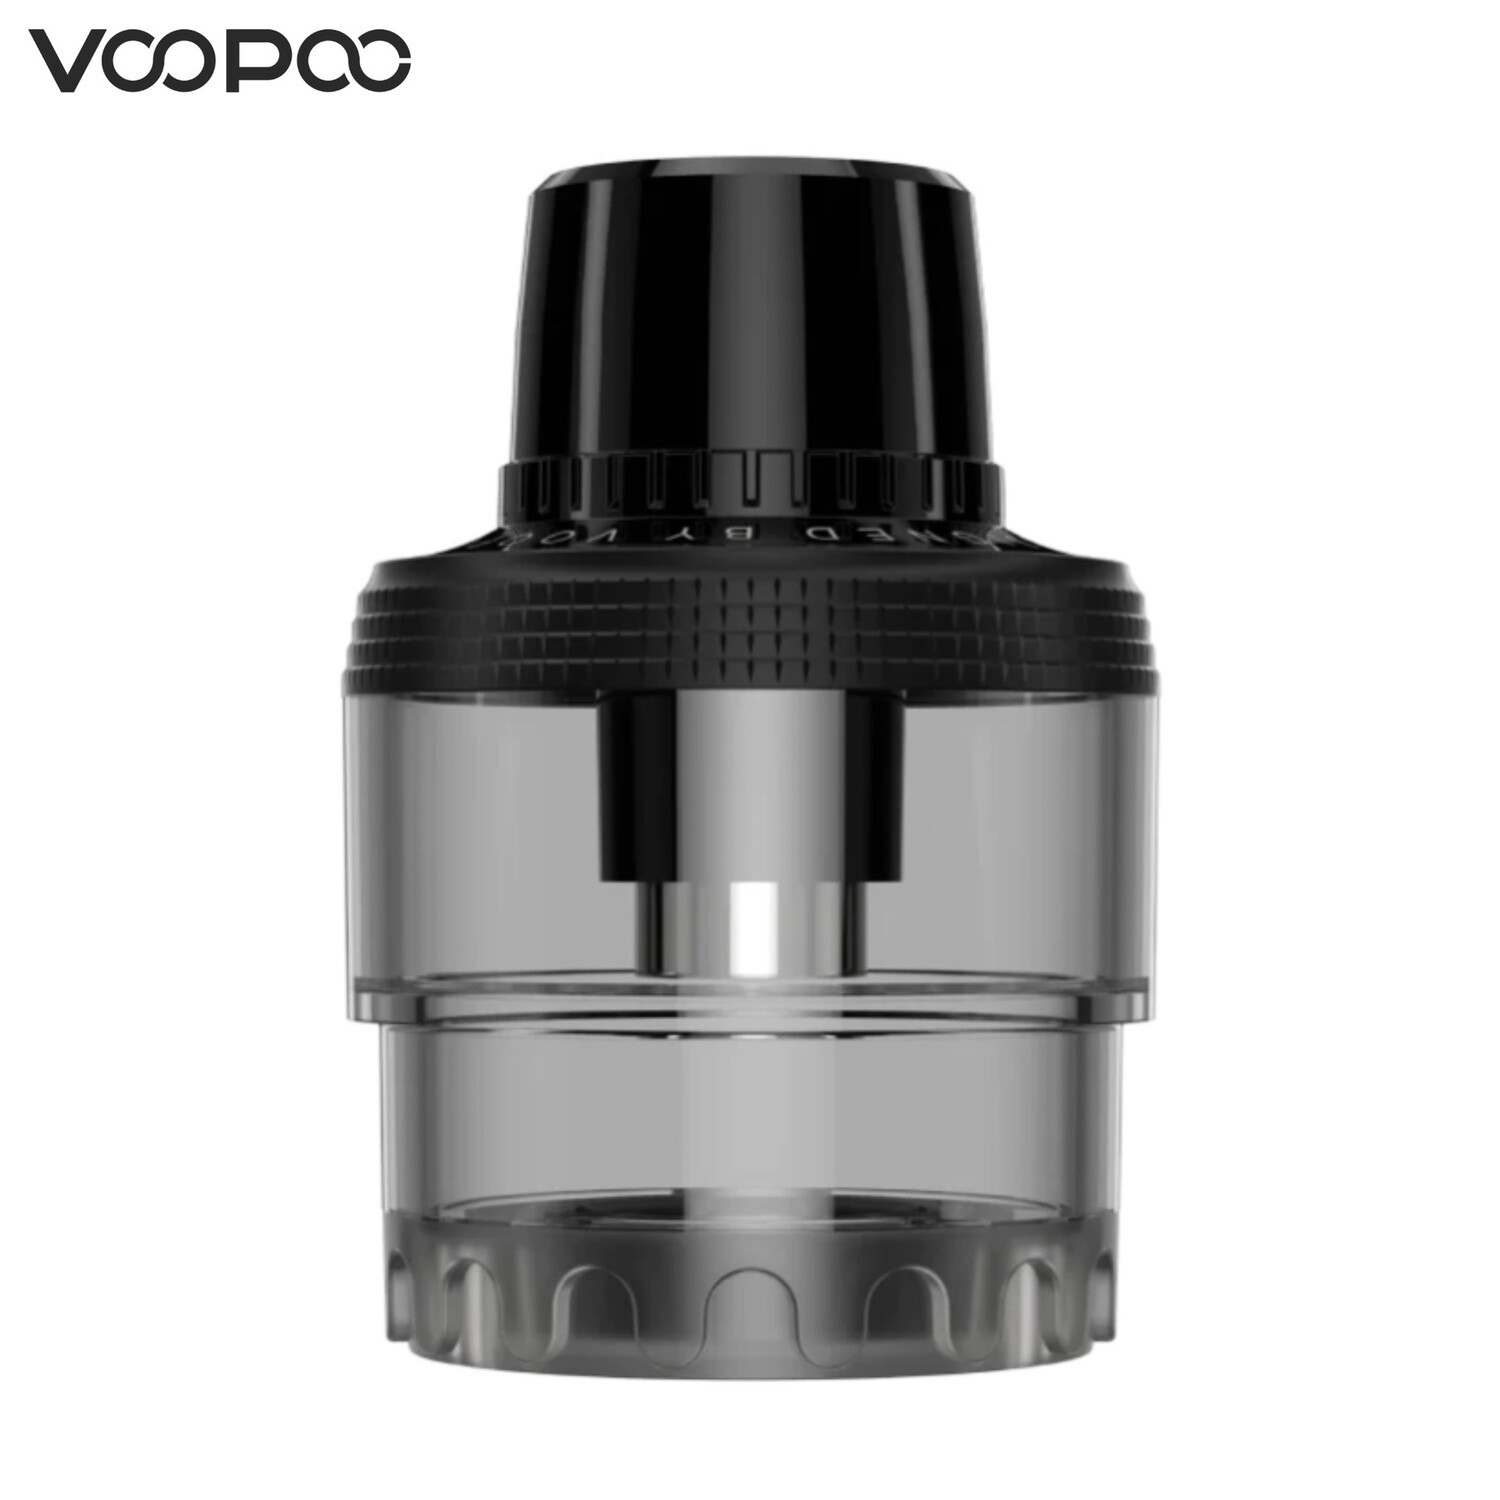 VooPoo® PnP Pod, Package Size: 2 Pods (No Coils)